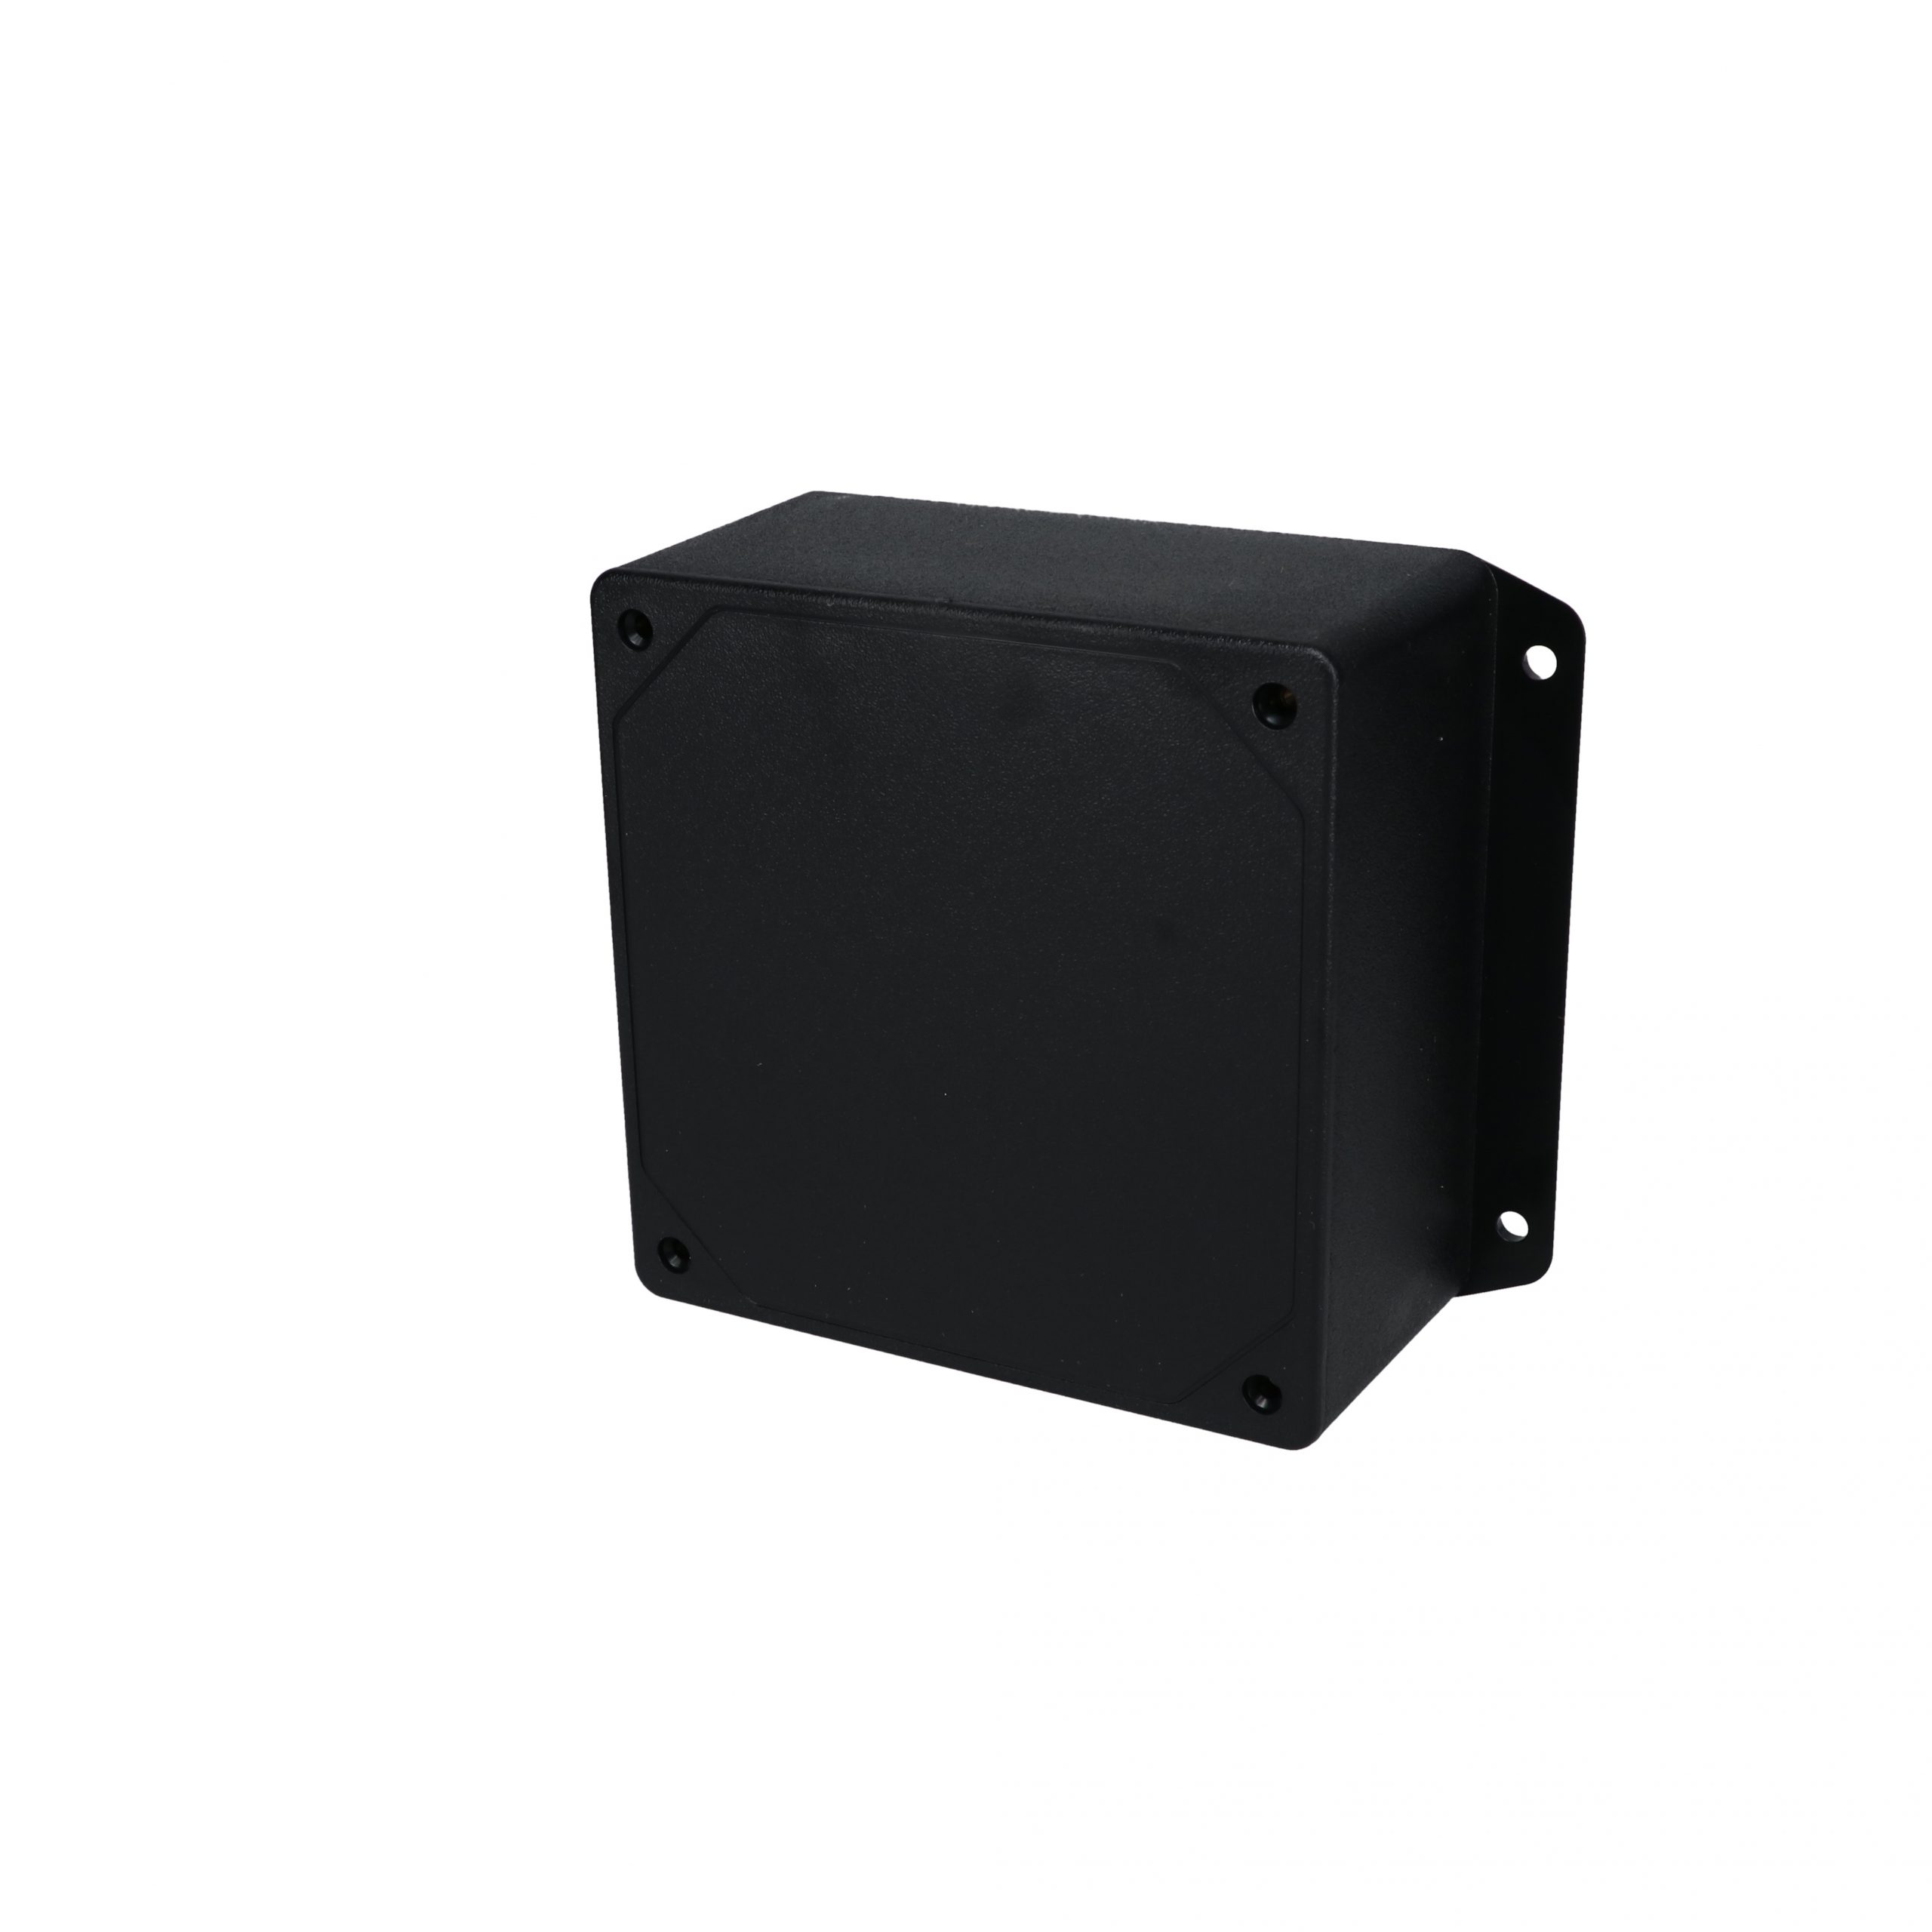 BUD Industries CU-3282-MB Plastic Style A Utility Box with Mounting Bracket Black Texture Finish 4-19/32 Length x 4-19/32 Width x 2-23/64 Height 4-19/32 Length x 4-19/32 Width x 2-23/64 Height 